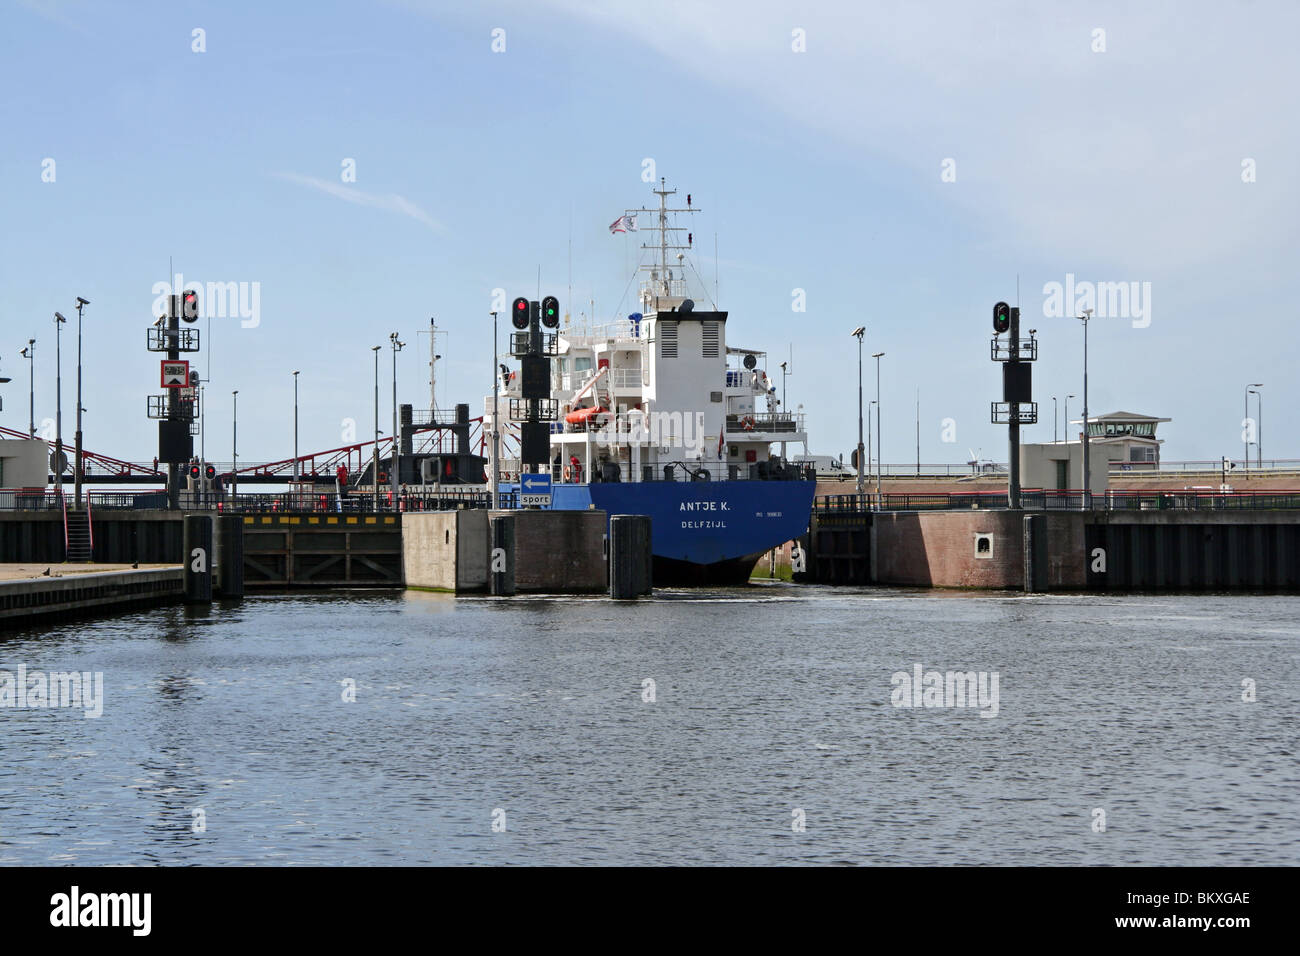 The Locks at Ijmuiden with the North Sea Canal connecting Amsterdam to the open North Sea Velsen The Netherlands Europe Stock Photo